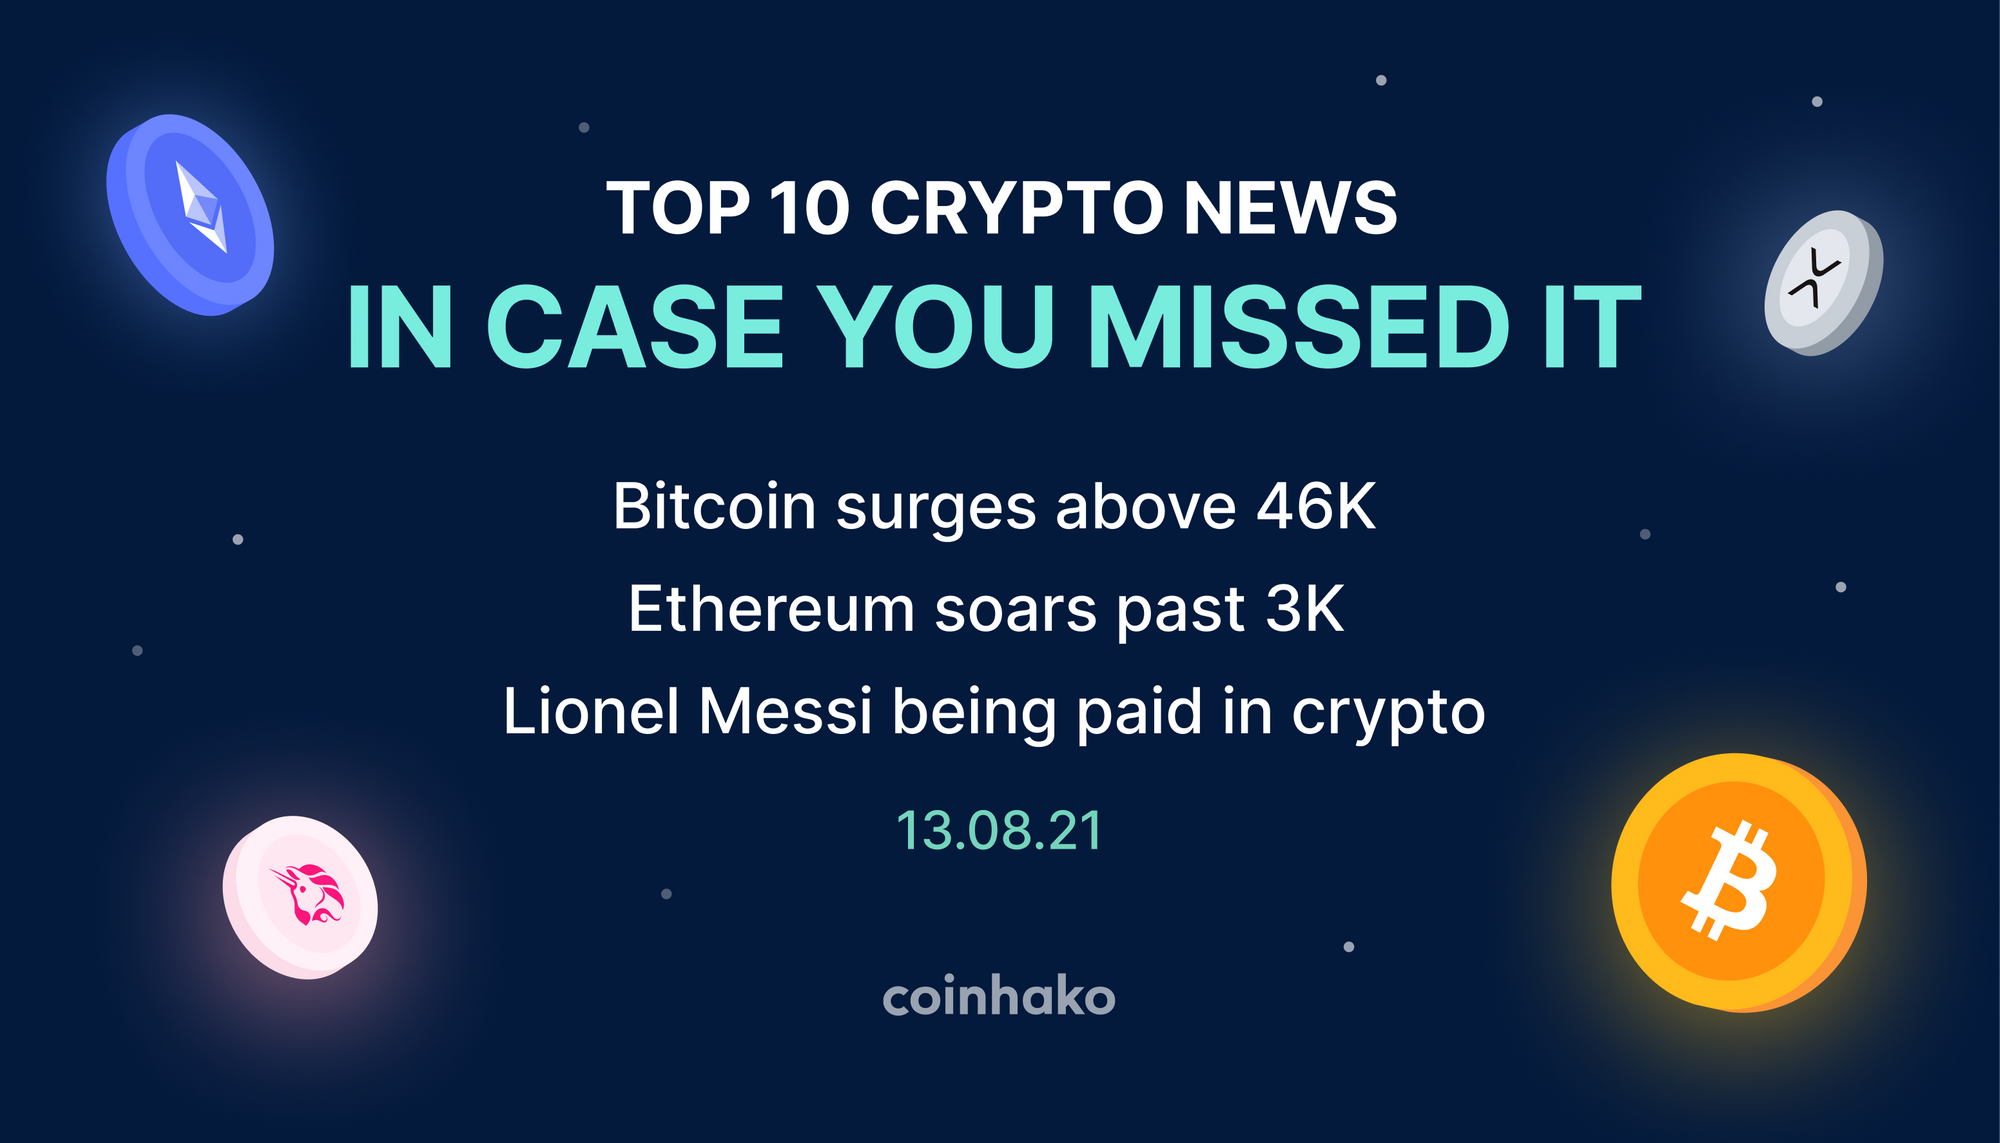 Top 10 Crypto News In Case You Missed It: BTC surges above 46K, ETH soars past 3K, Lionel Messi and Crypto?